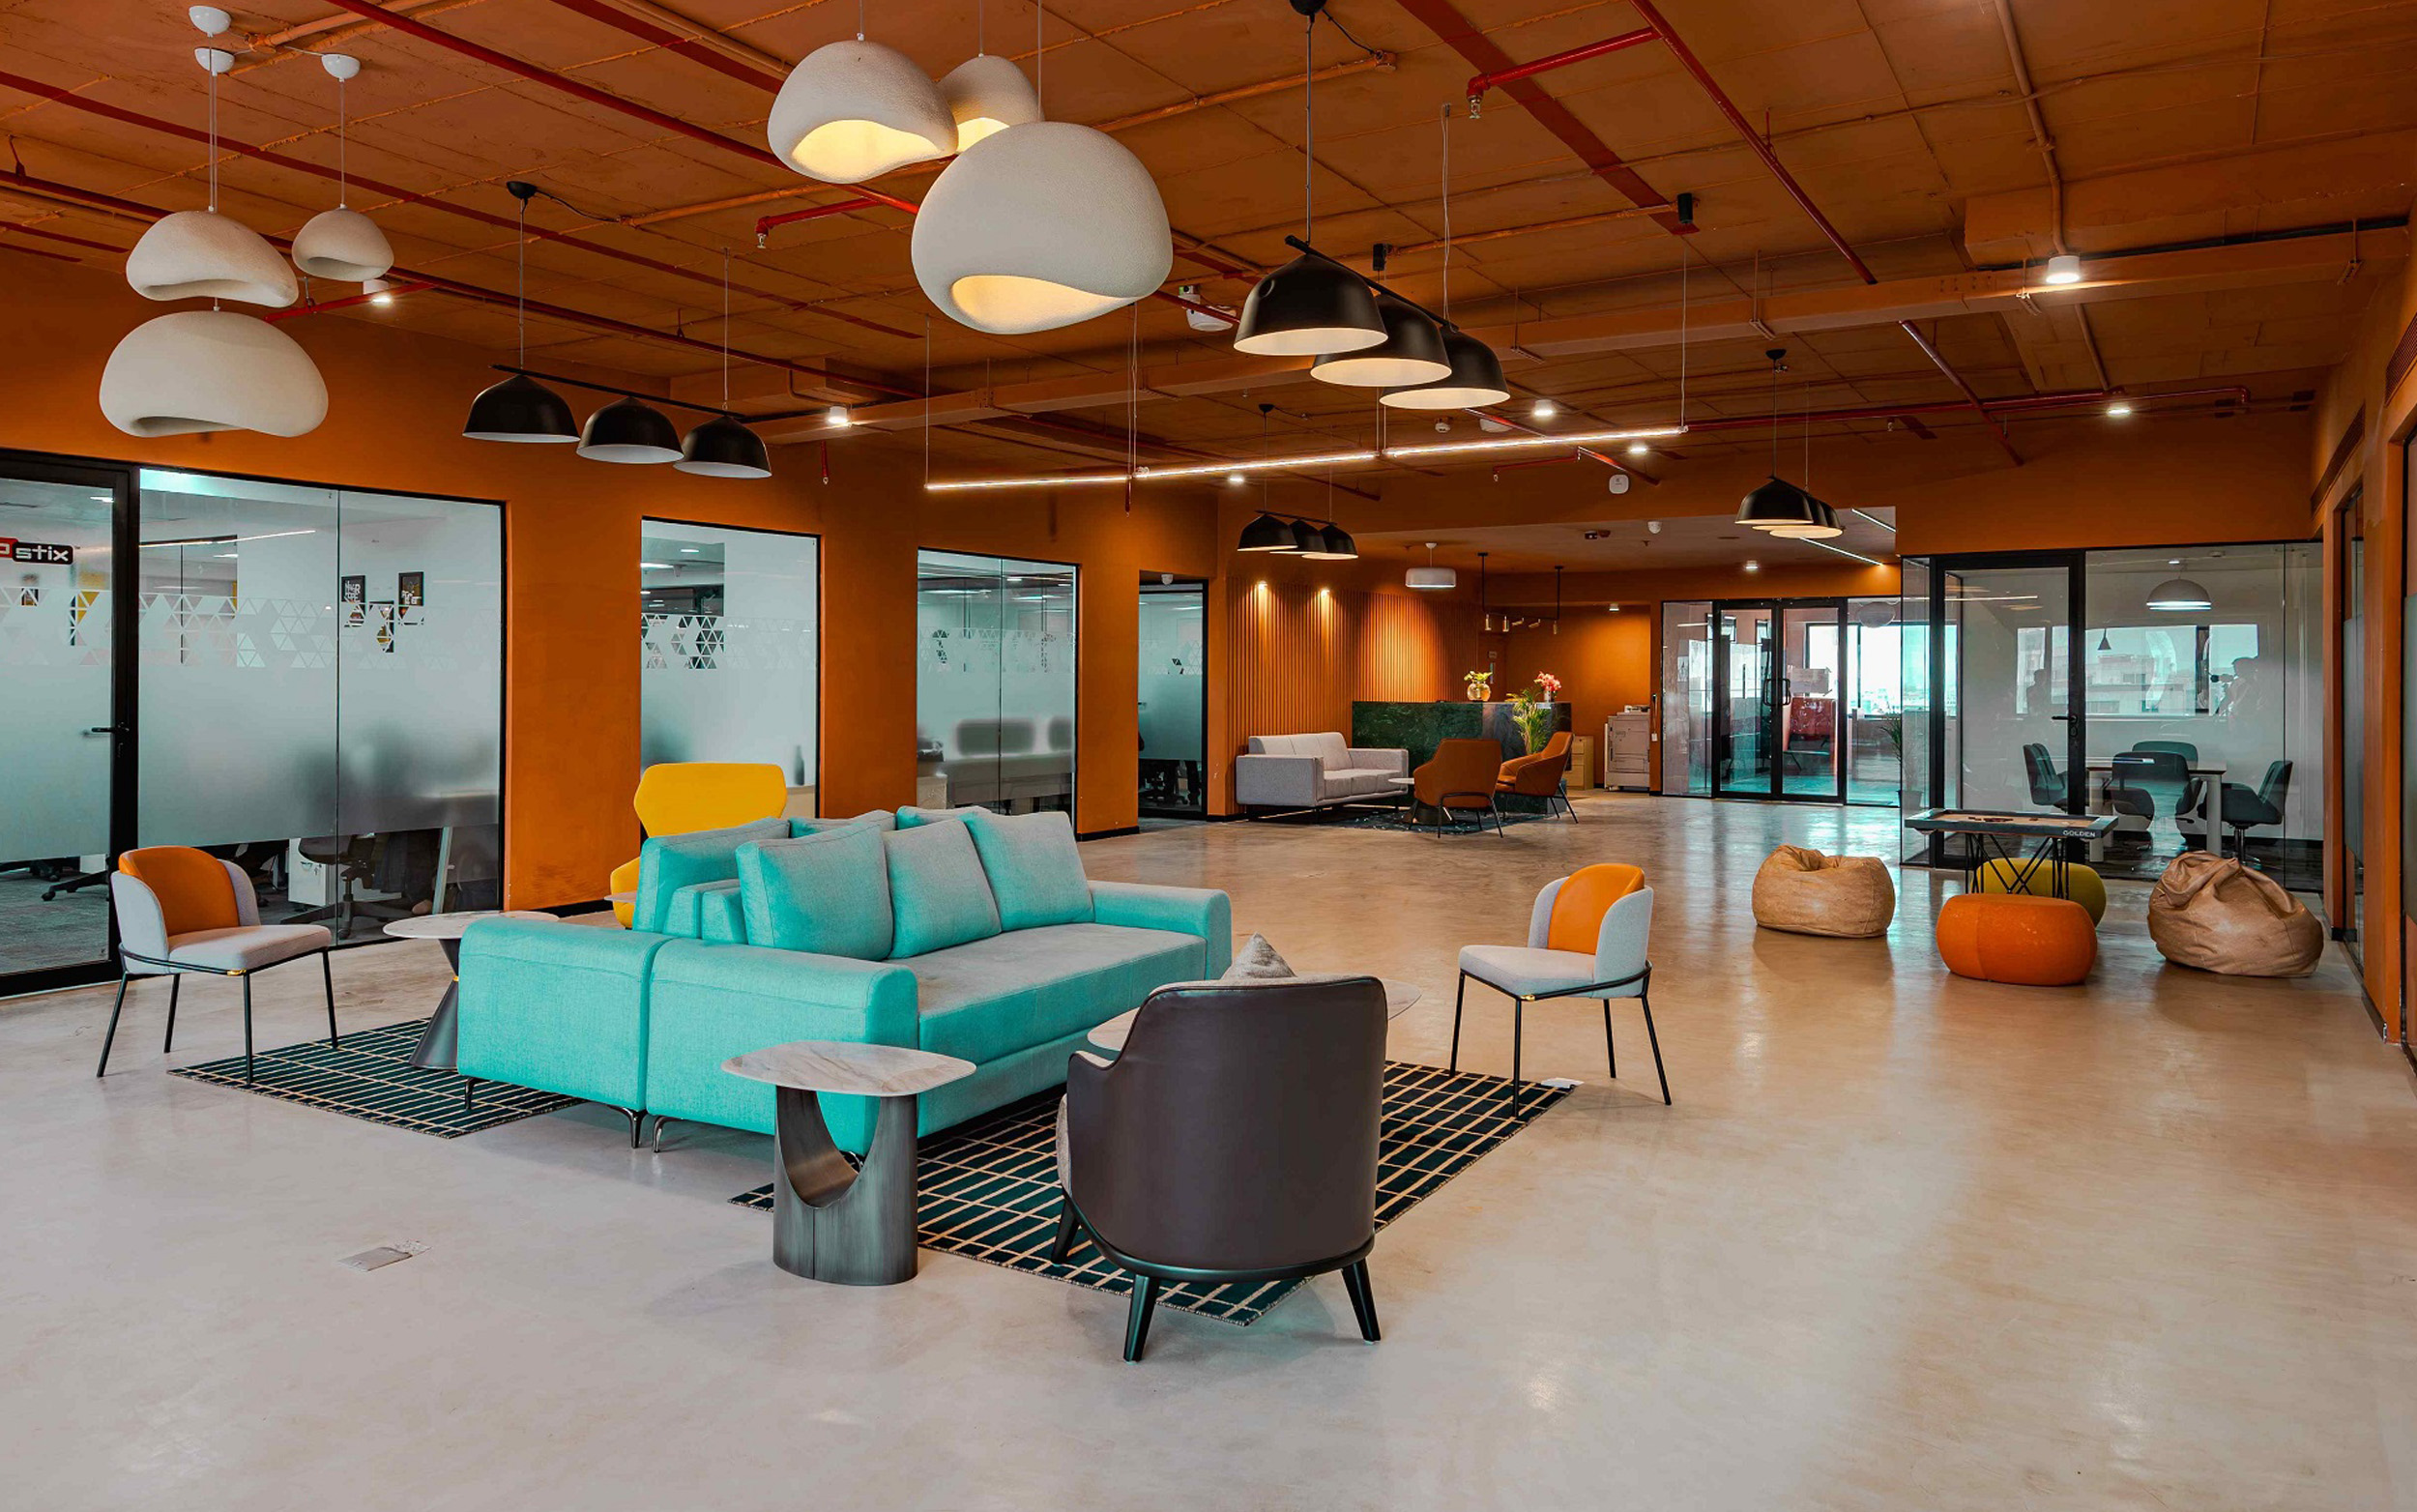 Cove offices’ coworking spaces in OMR Chennai with private office spaces